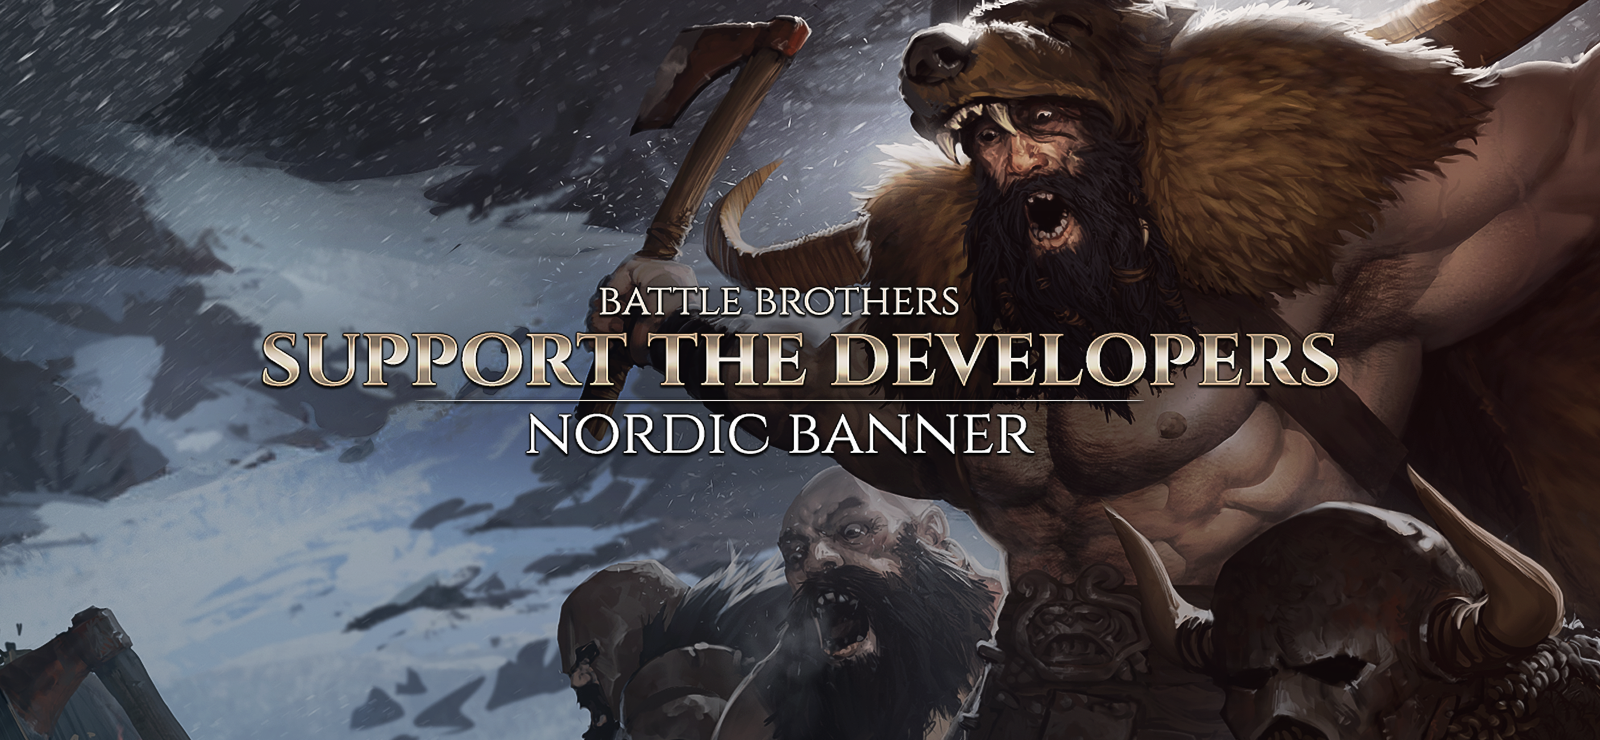 Battle Brothers - Support The Developers & Nordic Banner